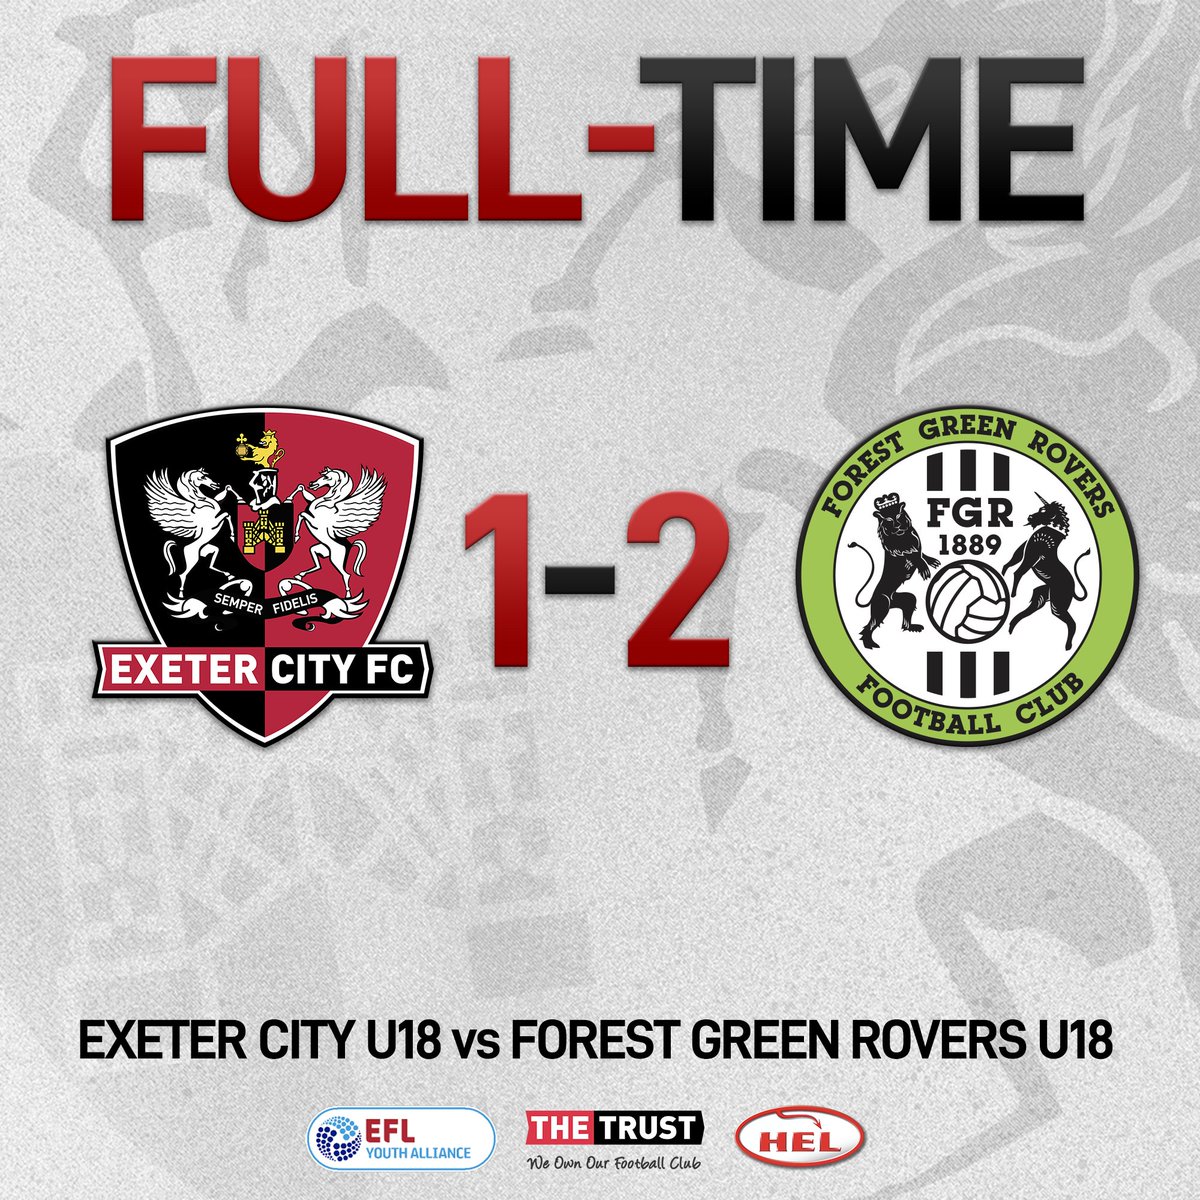 ⏱️ FULL-TIME: City 1️⃣ @FGRFC_Official 2️⃣ Despite George Birch's goal, City U18s fall to defeat at home #ECFC #SemperFidelis